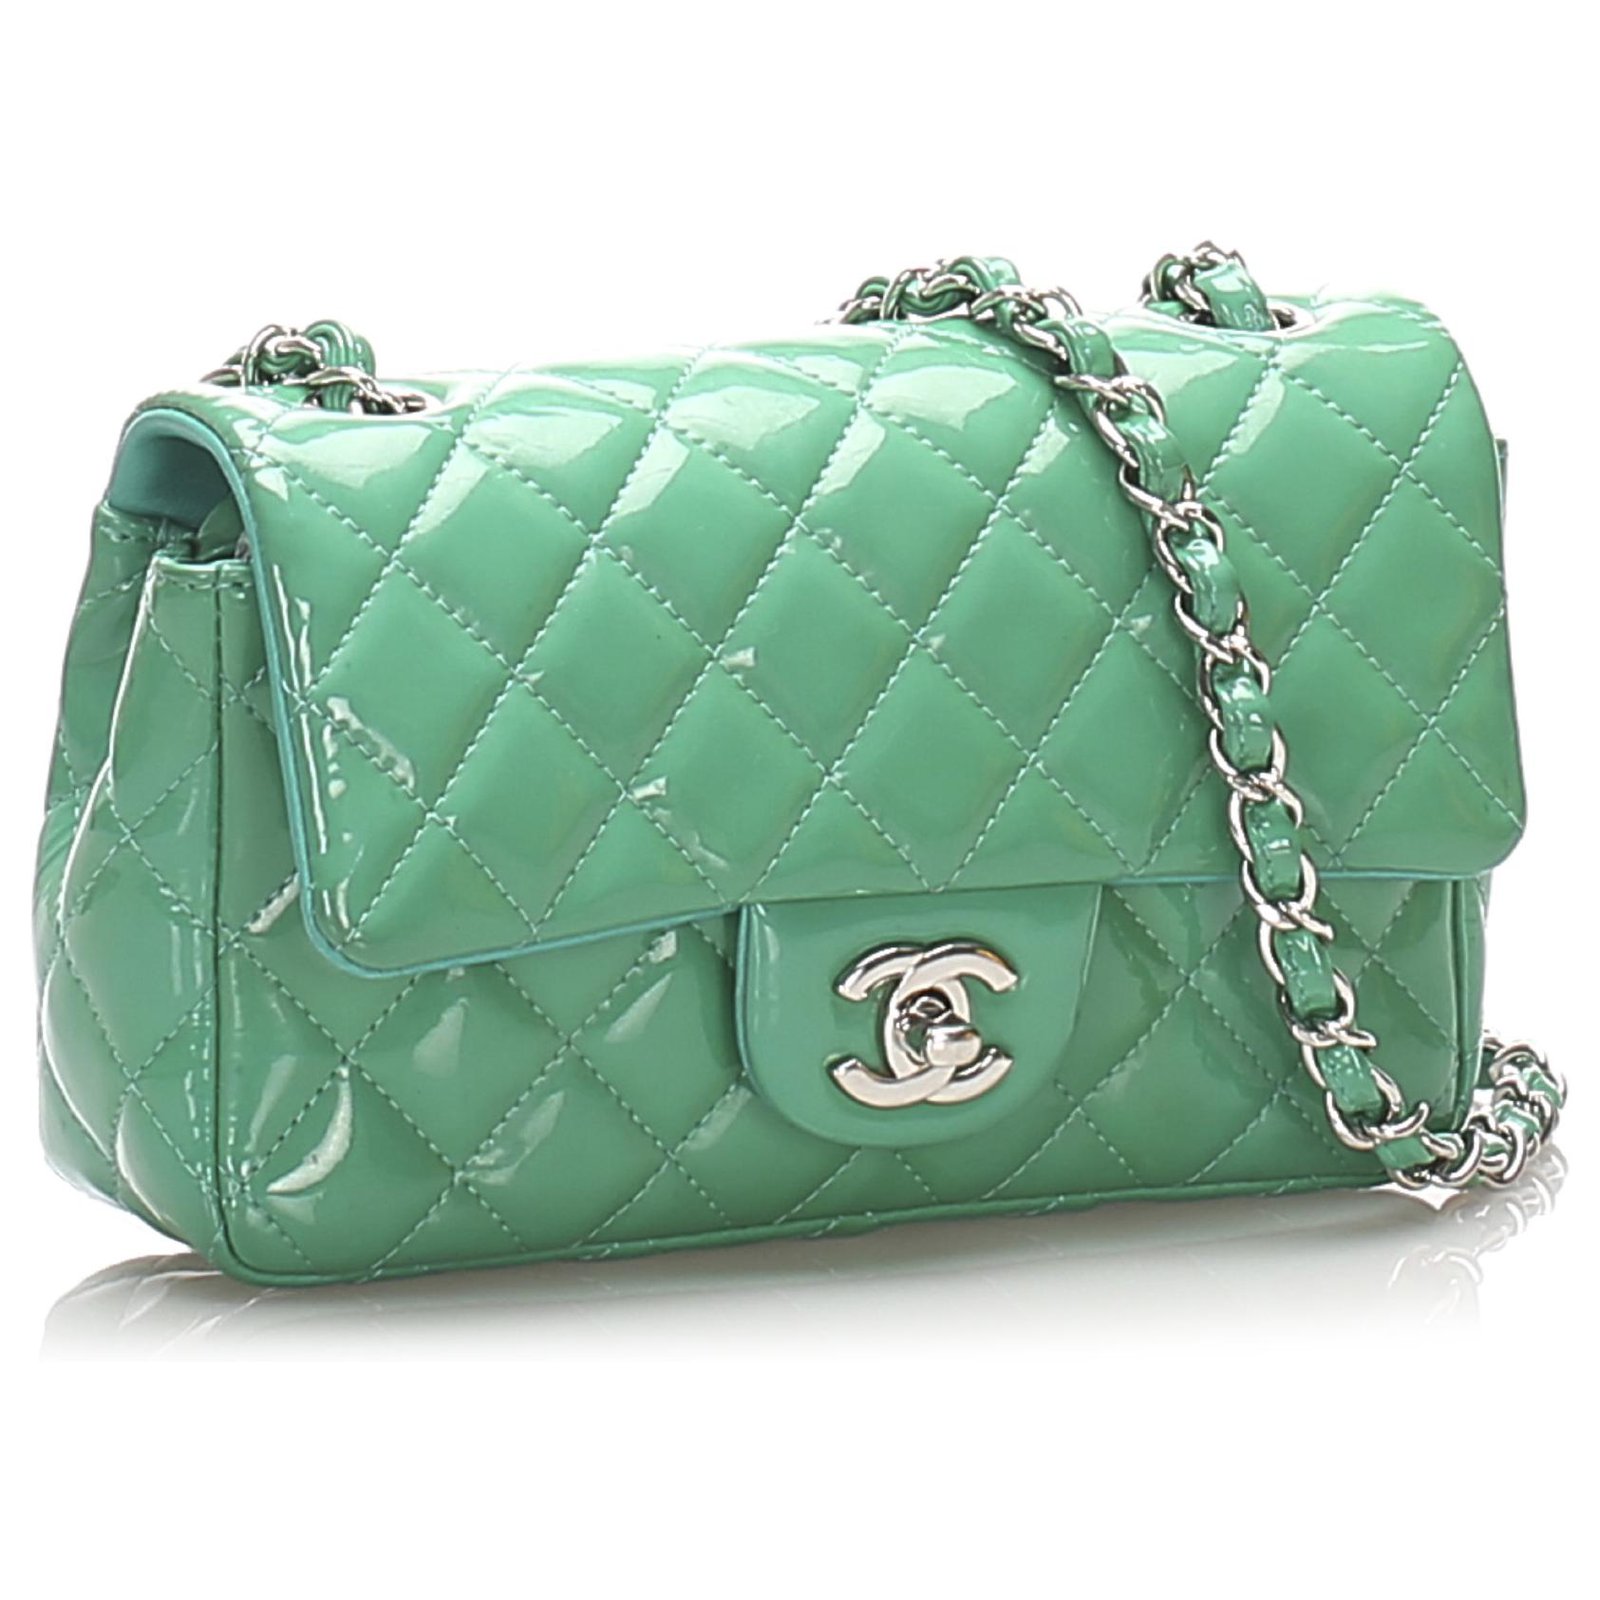 Timeless/classique patent leather handbag Chanel Green in Patent leather -  36000771